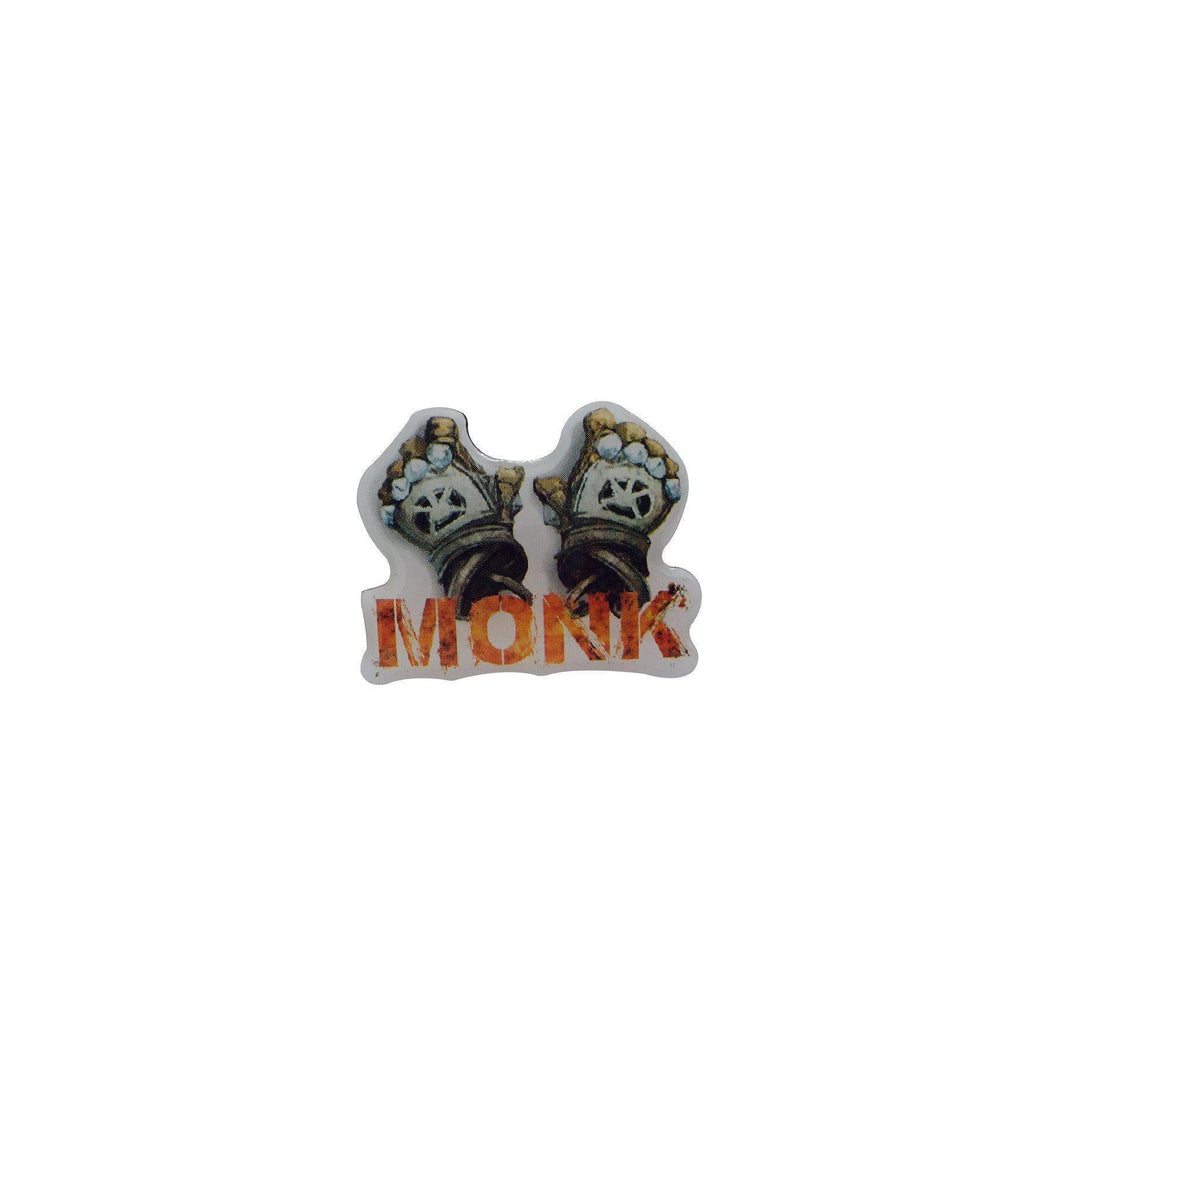 Monk – Adventure Pin Metal by Norse Foundry - 610074994886